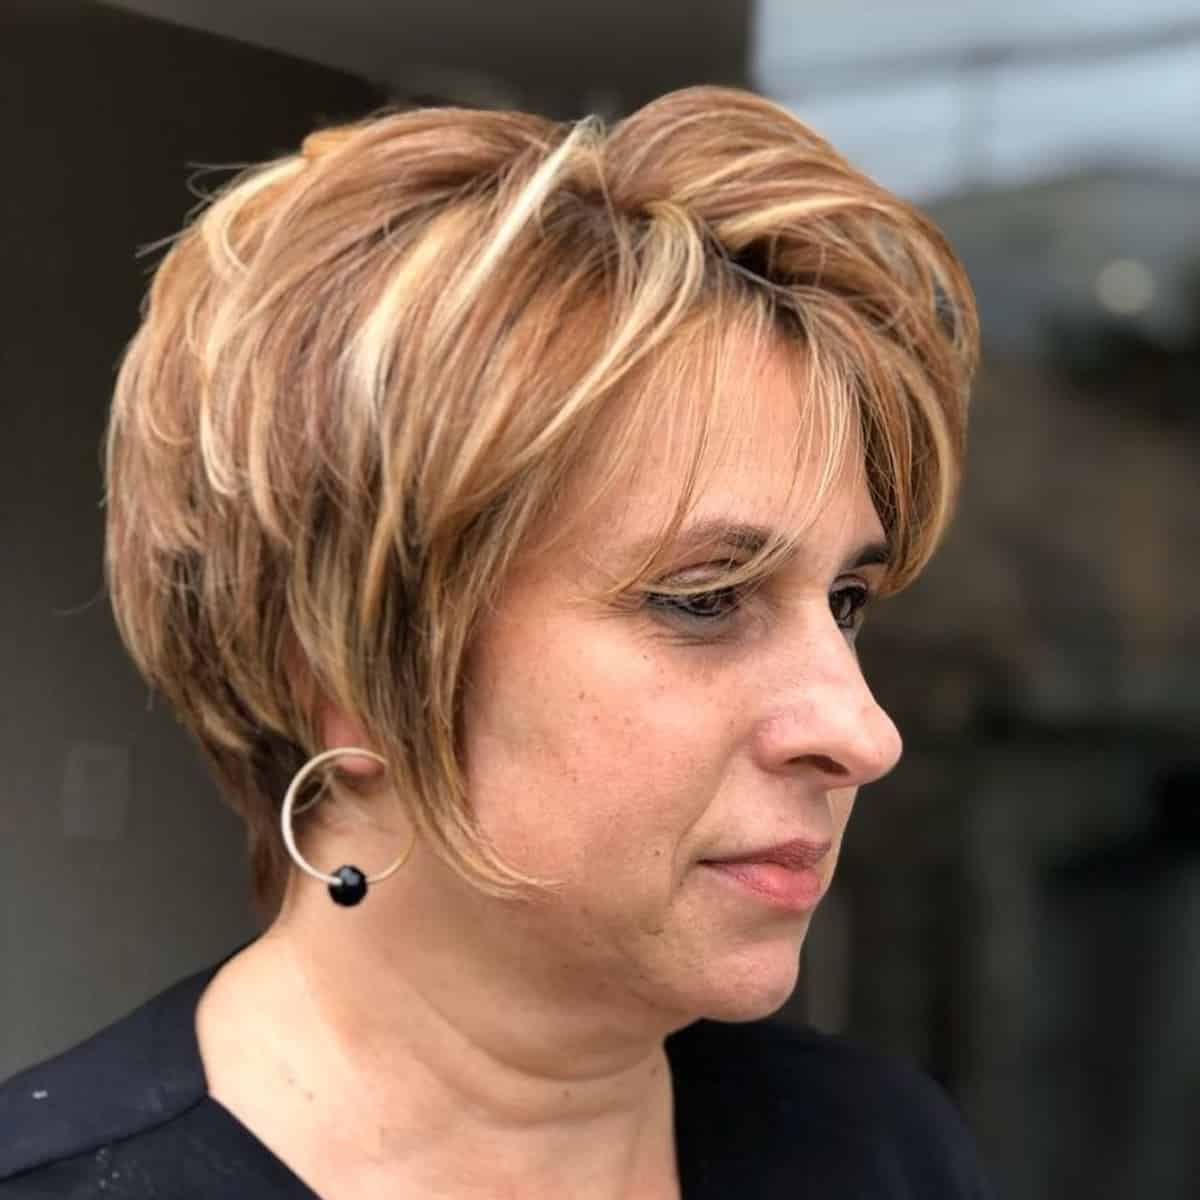 Layered pixie bob for hairstyle women in their fifties